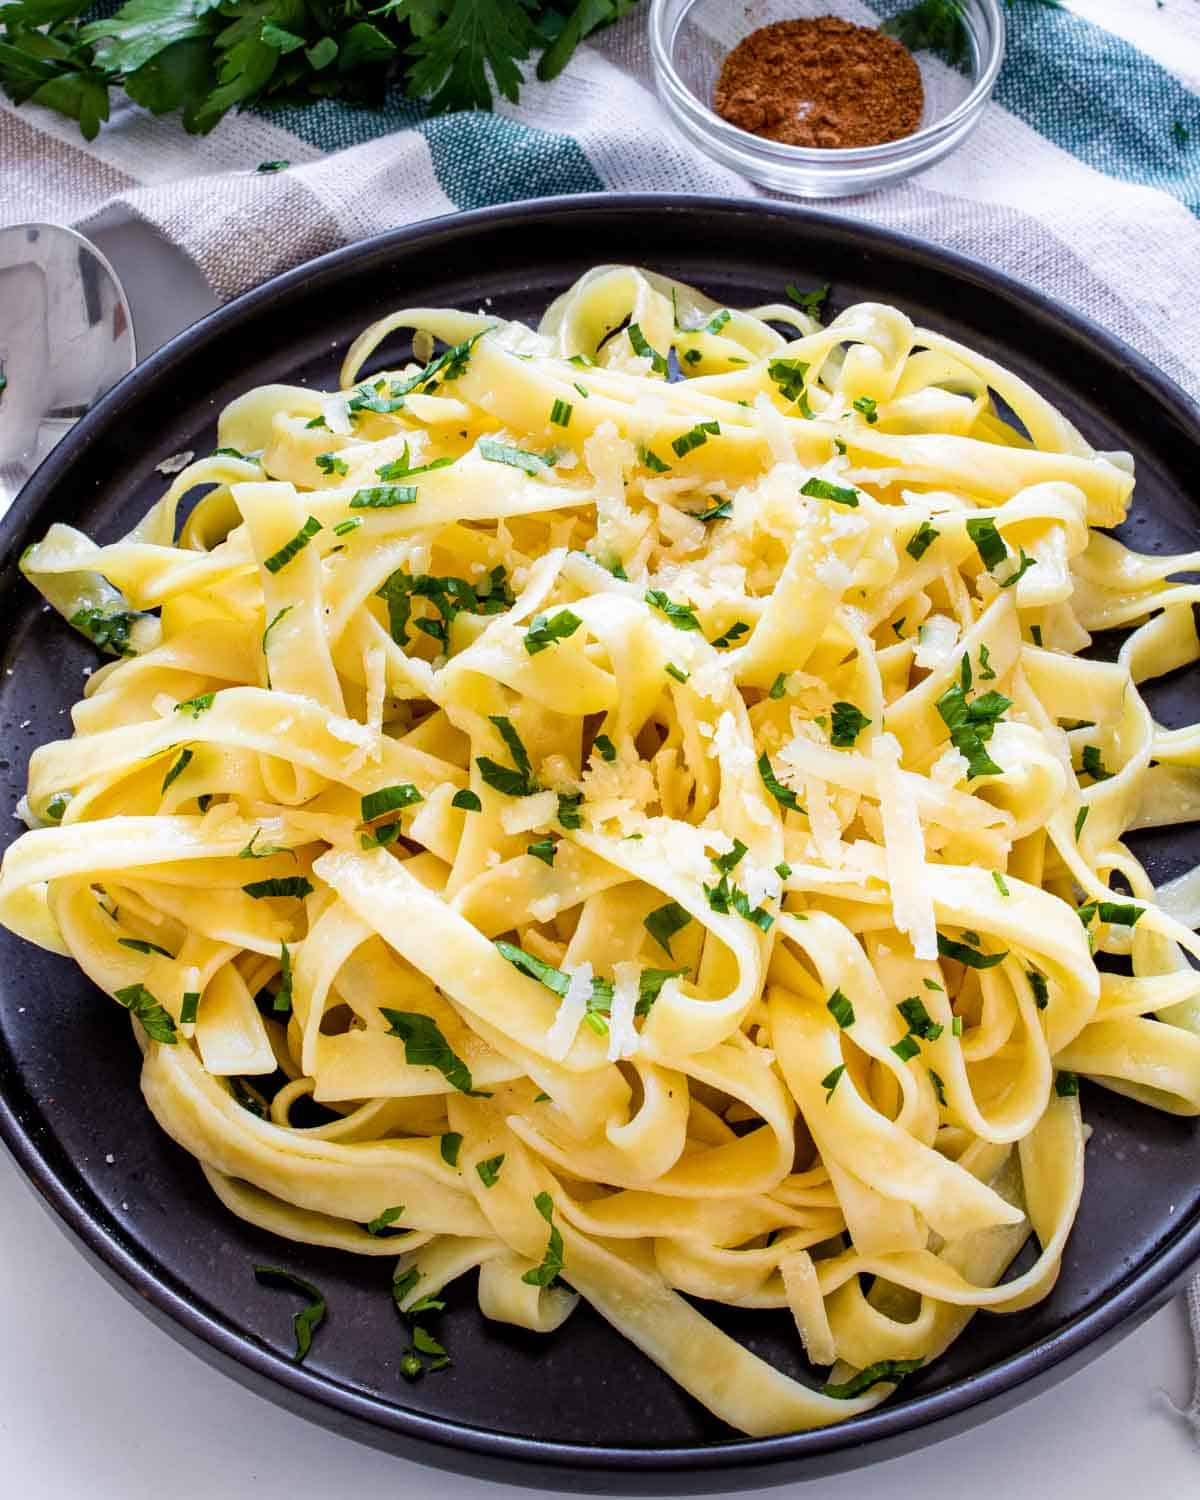 buttered noodles garnished with parsley on a black plate.